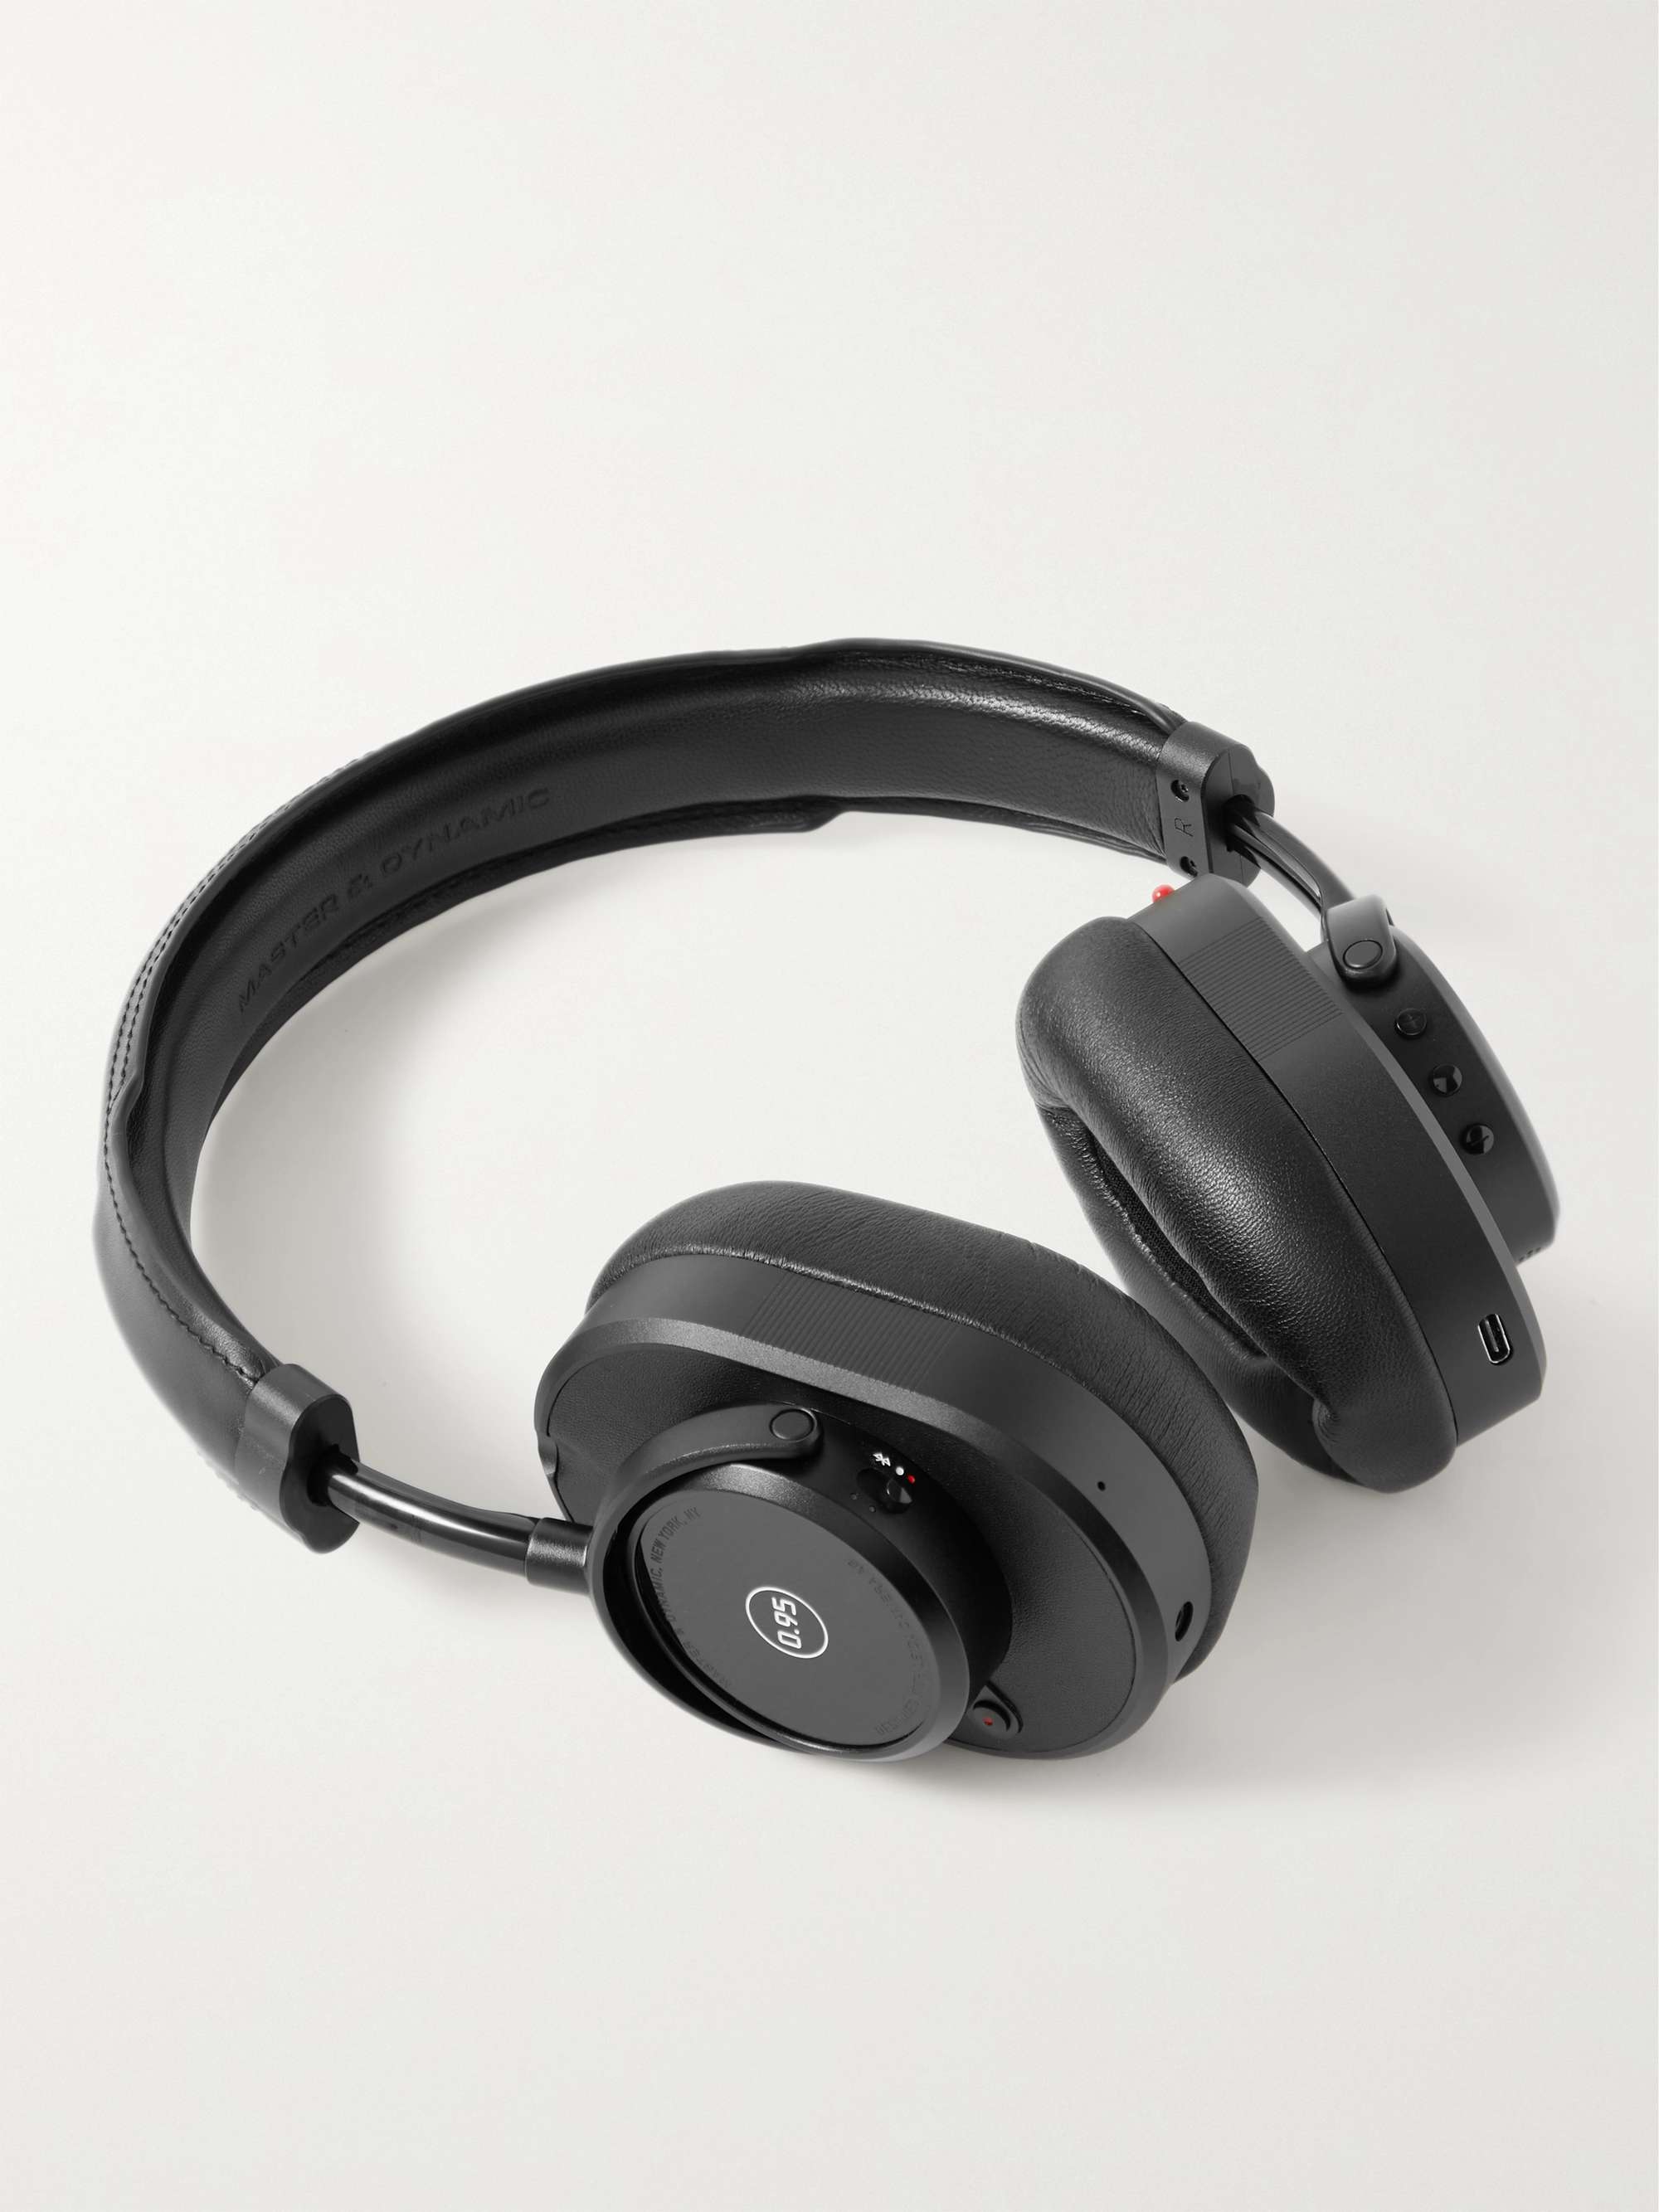 MASTER & DYNAMIC + Leica MW65 0.95 Wireless Leather Over-Ear Headphones